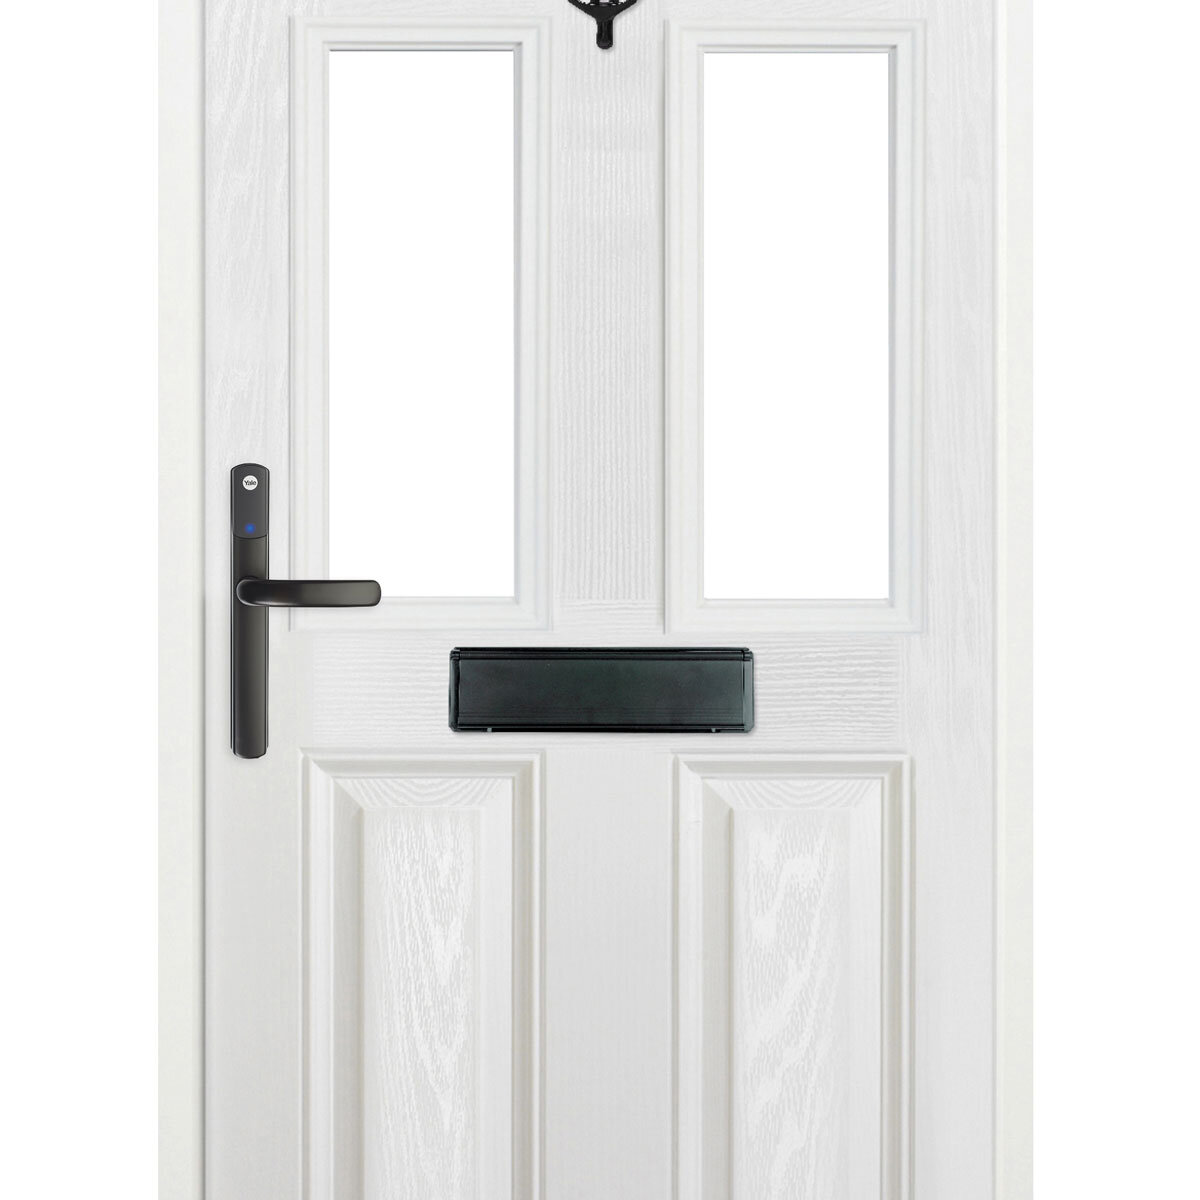 Cut out image of door with handle fitted on white background